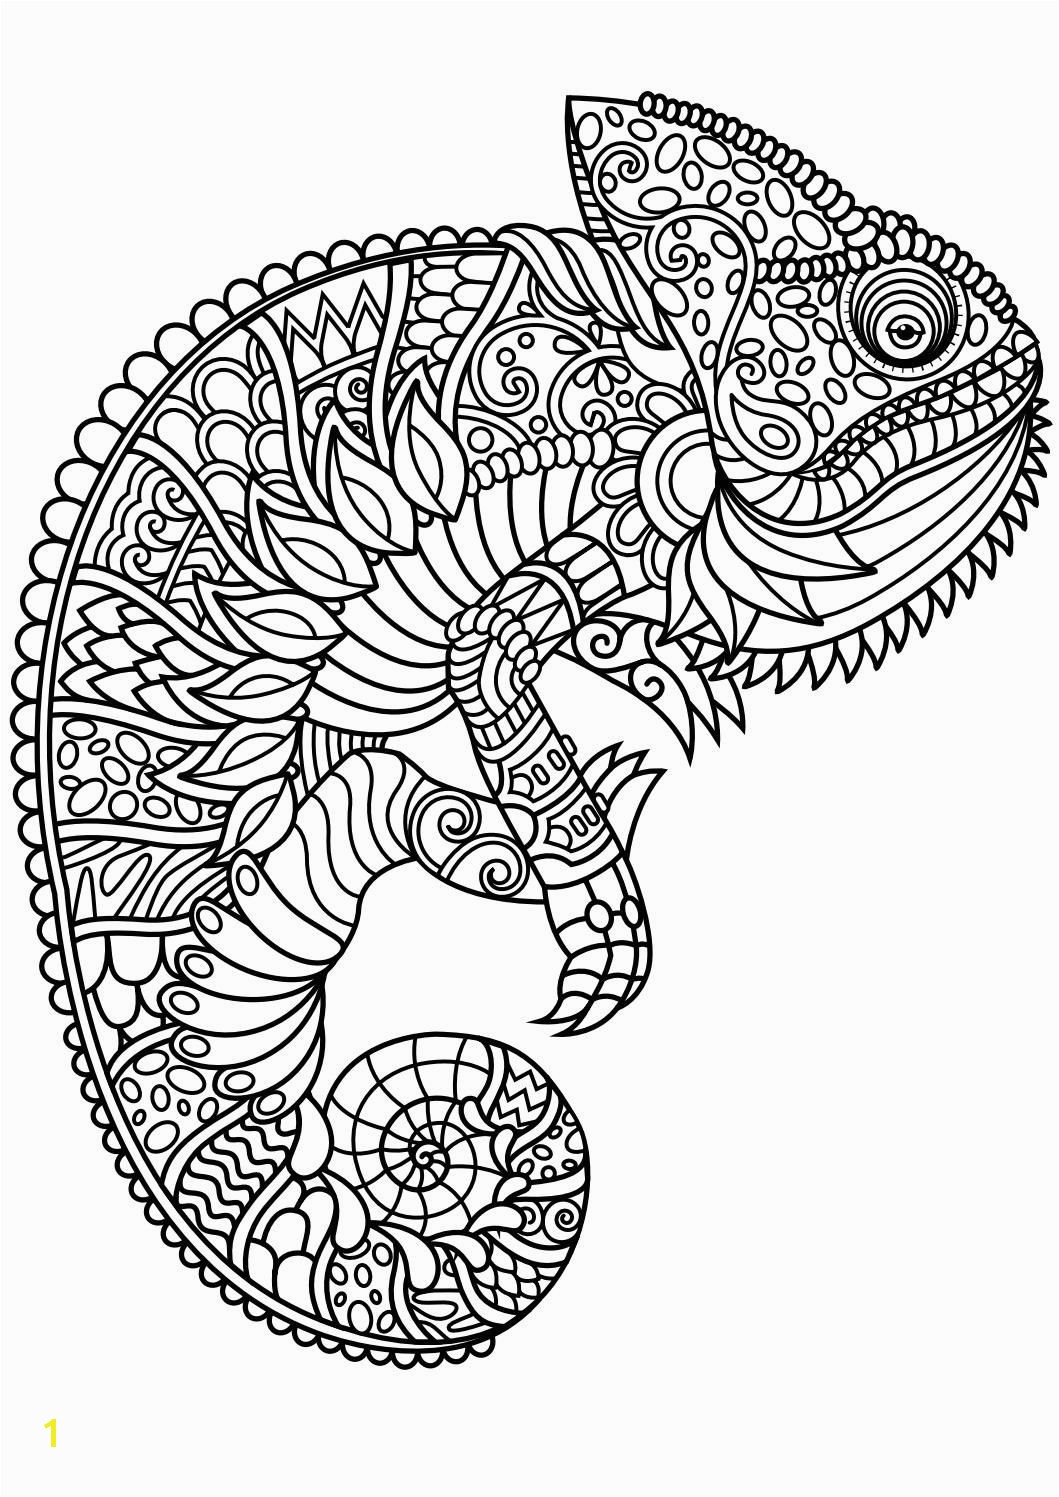 Free Printable Horse Coloring Pages for Adults Advanced Animal Coloring Pages Pdf Coloring Animals Pinterest